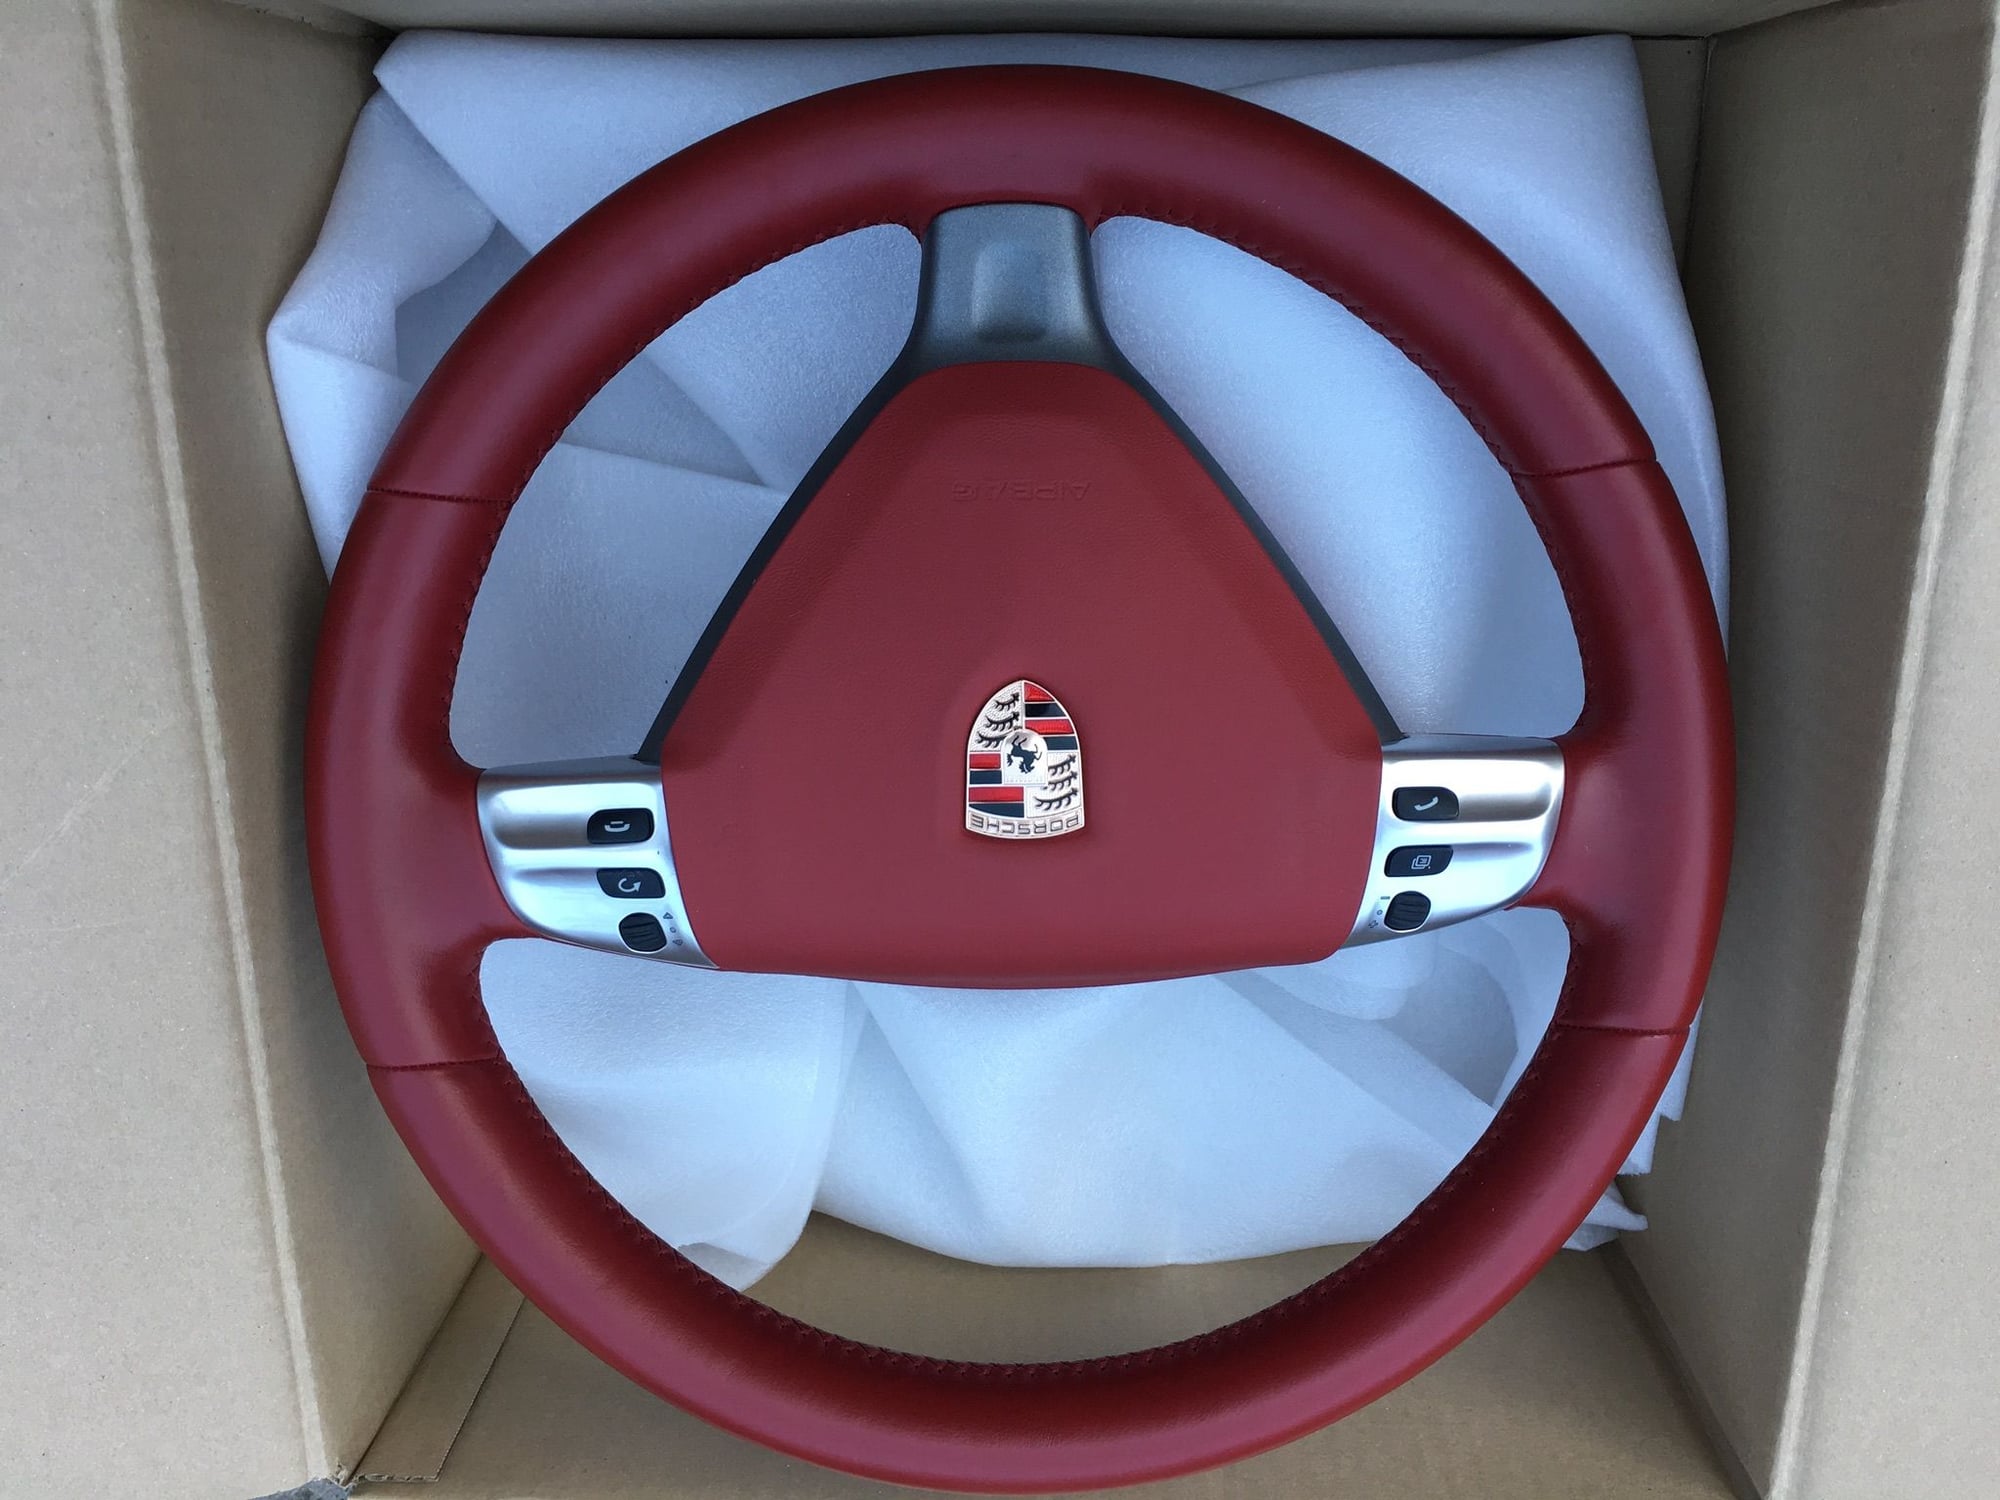 Interior/Upholstery - Porsche 911 997 Carrera Red Leather Multifunction Steering Wheel Excellent Conidtion - Used - 2005 to 2011 Porsche 911 - Palos Verdes Estates, CA 90274, United States